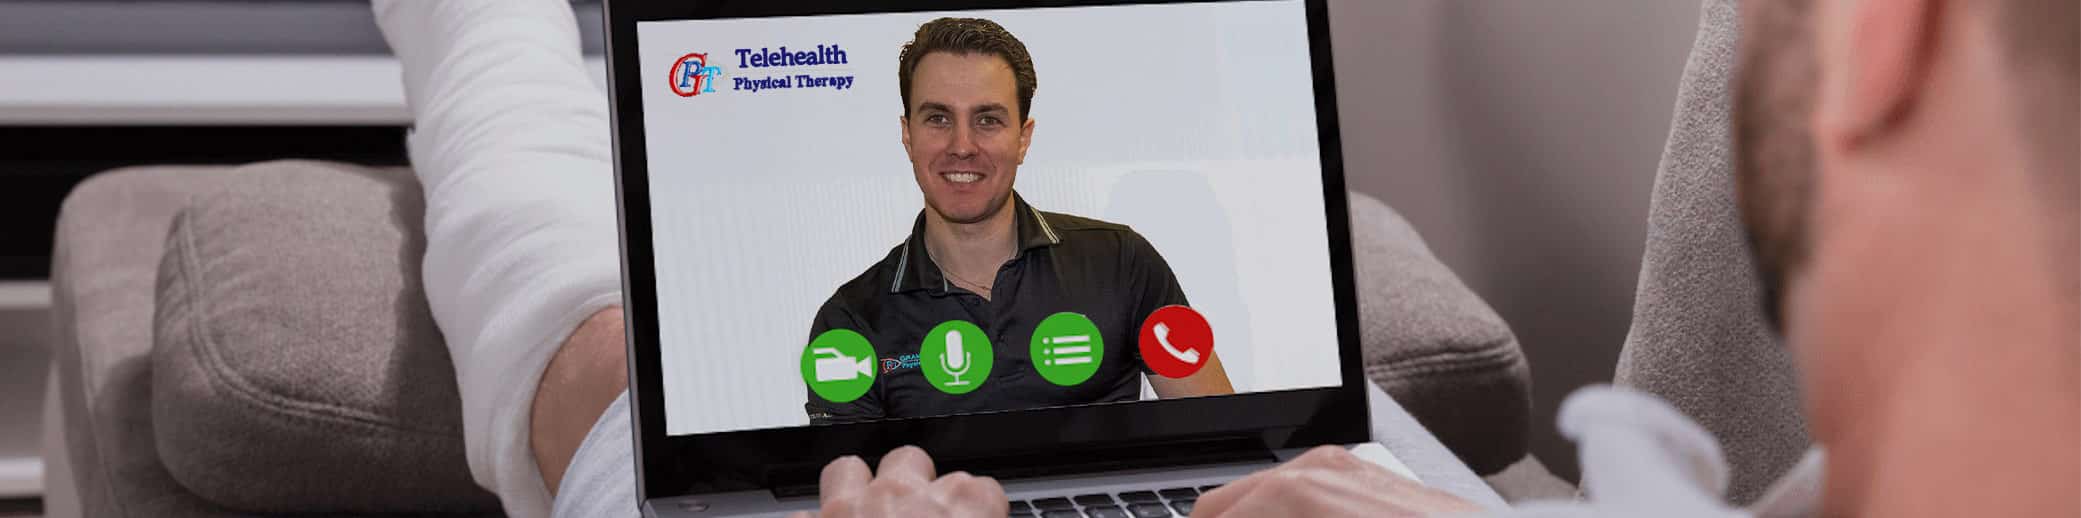 Telehealth physical therapy NYC